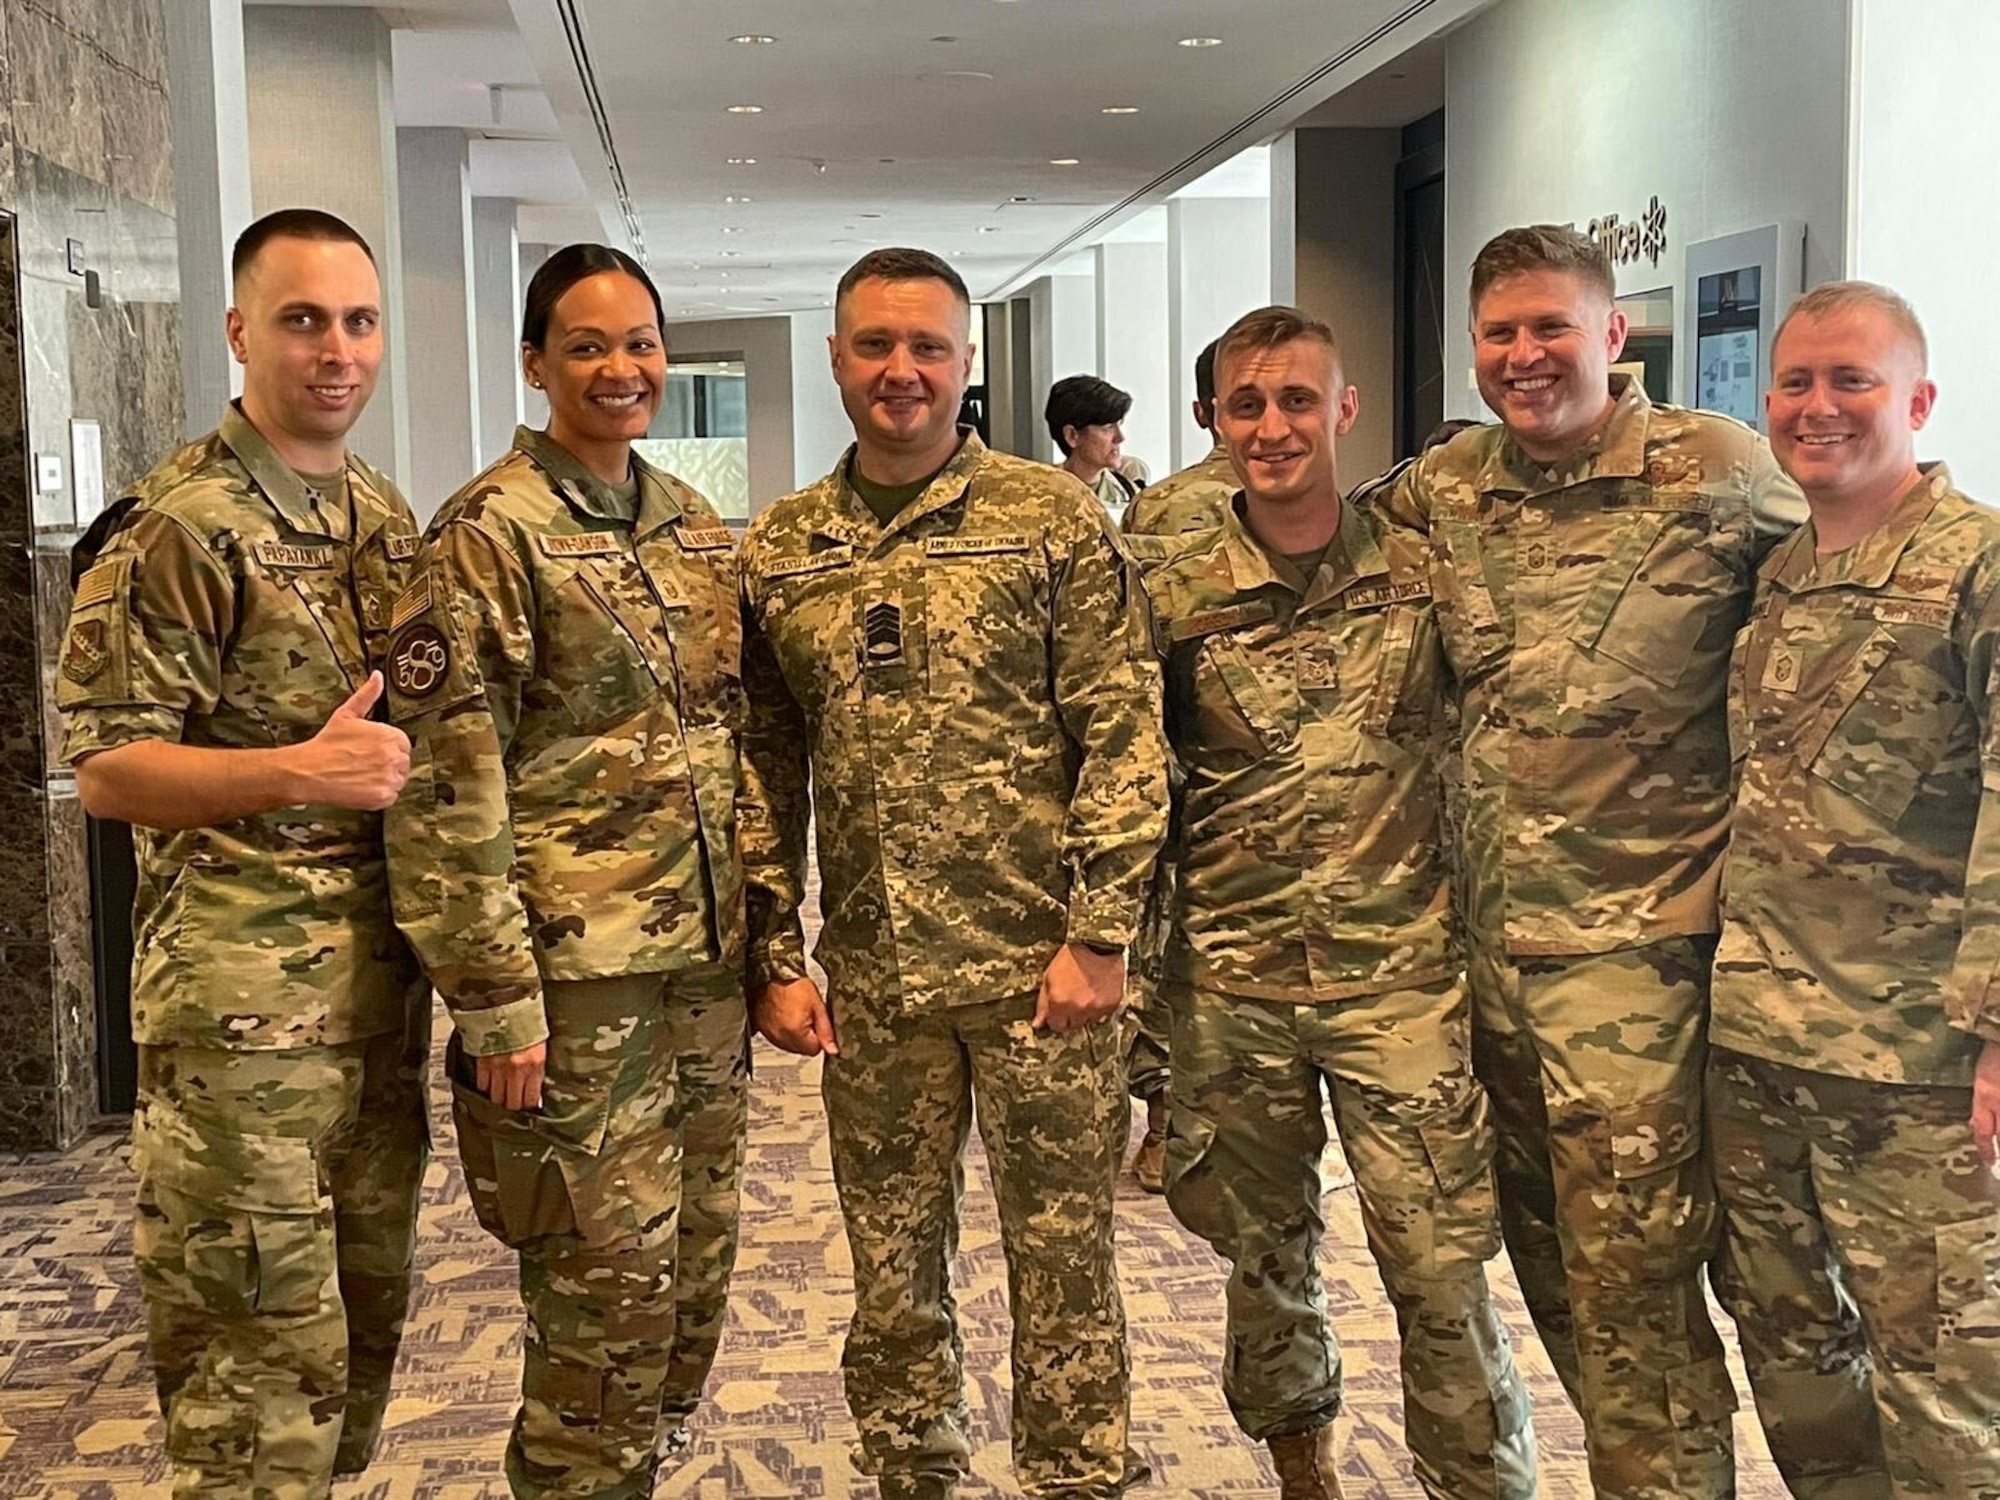 From left, U.S. Air Force Master Sgt. Yuriy Papayanki, 97th Healthcare Operations Squadron medical administration technician, poses for a photo with Kostiantyn Stanislavchuk, Chief Master Sergeant of the Ukrainian Air Force and others at the Senior Enlisted Leader International Summit in Arlington, Va., Aug. 1, 2022. Papayanki directly supported bilats at the Pentagon with the Sgt. Maj. of the Army, Deputy Master Chief Petty Officer of the Navy, Chief Master Sergeant of Space Force, Undersecretary of the Air Force for International Affairs, and a multitude of international Chief Master Sergeant of the Air Force equivalents. (Courtesy photo by Master Sgt. Yuriy Papayanki)